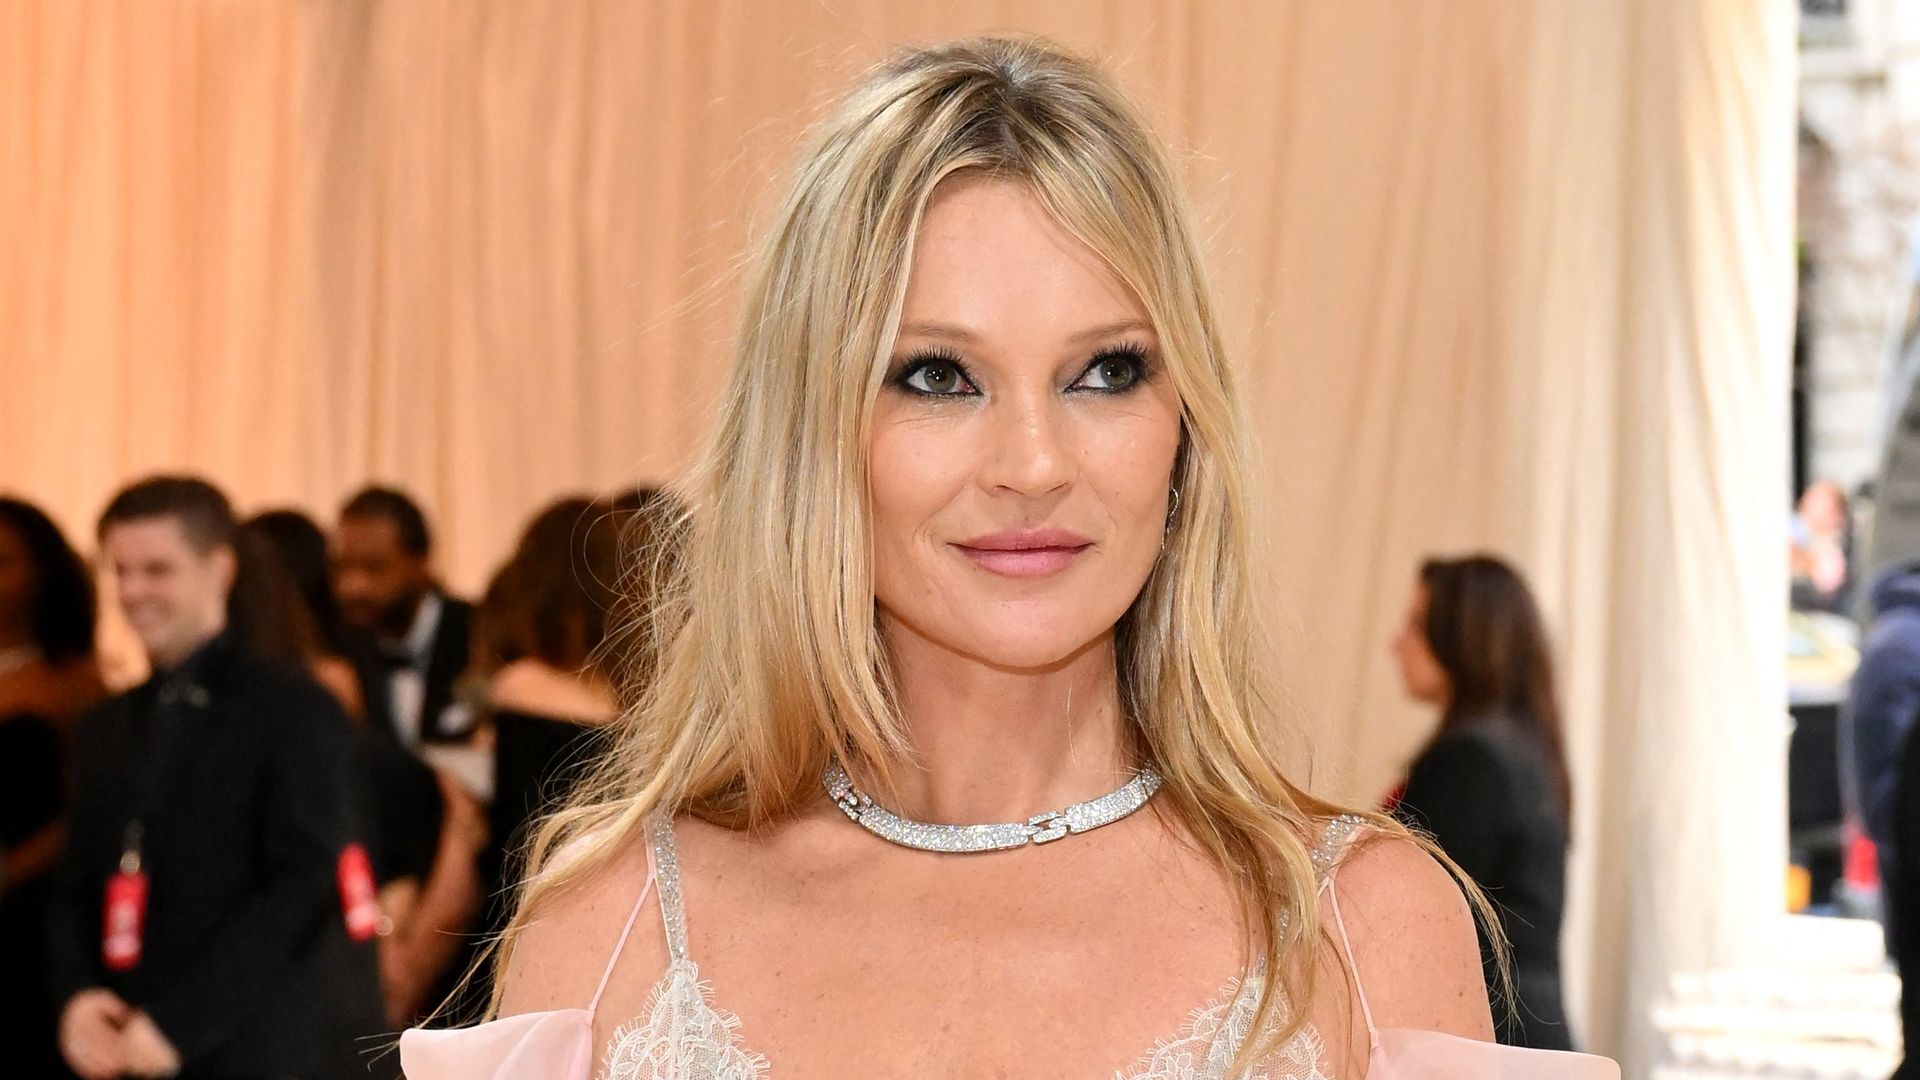 Kate Moss' hair stylist reveals the key tool behind her 'sexy, rock 'n